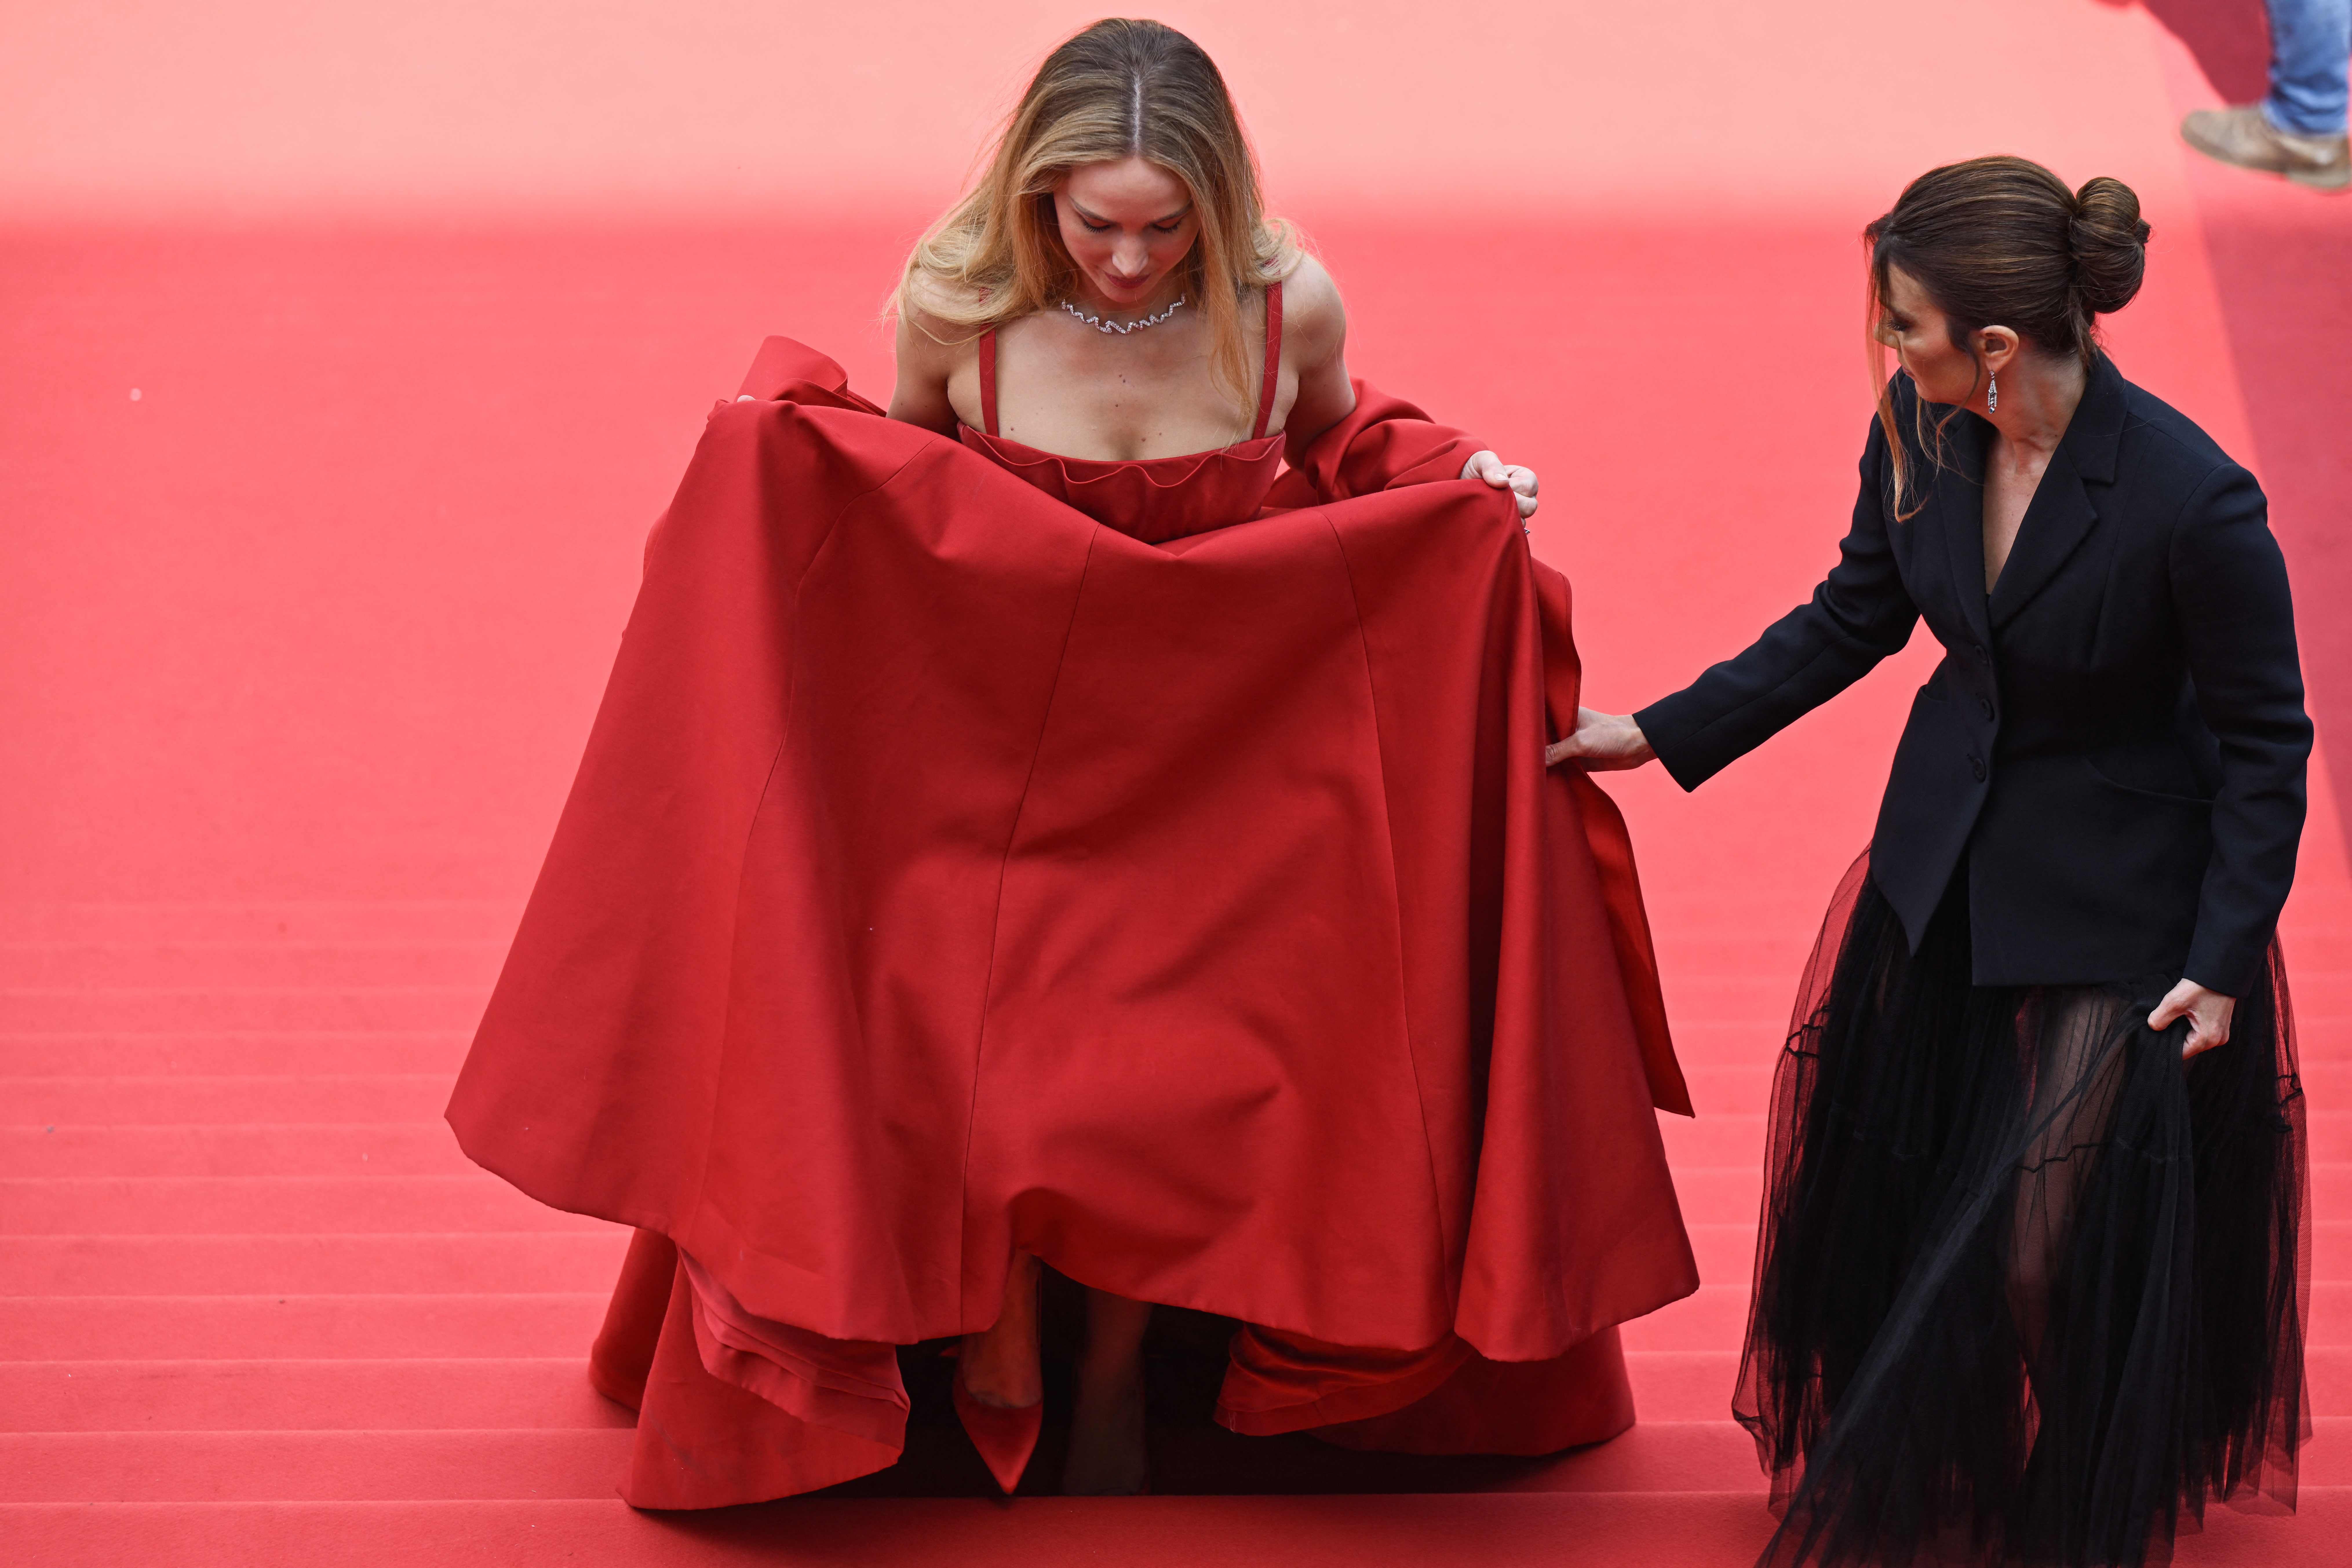 J.Law chose to trip down the red carpet in a red Christian Dior gown and flip flops